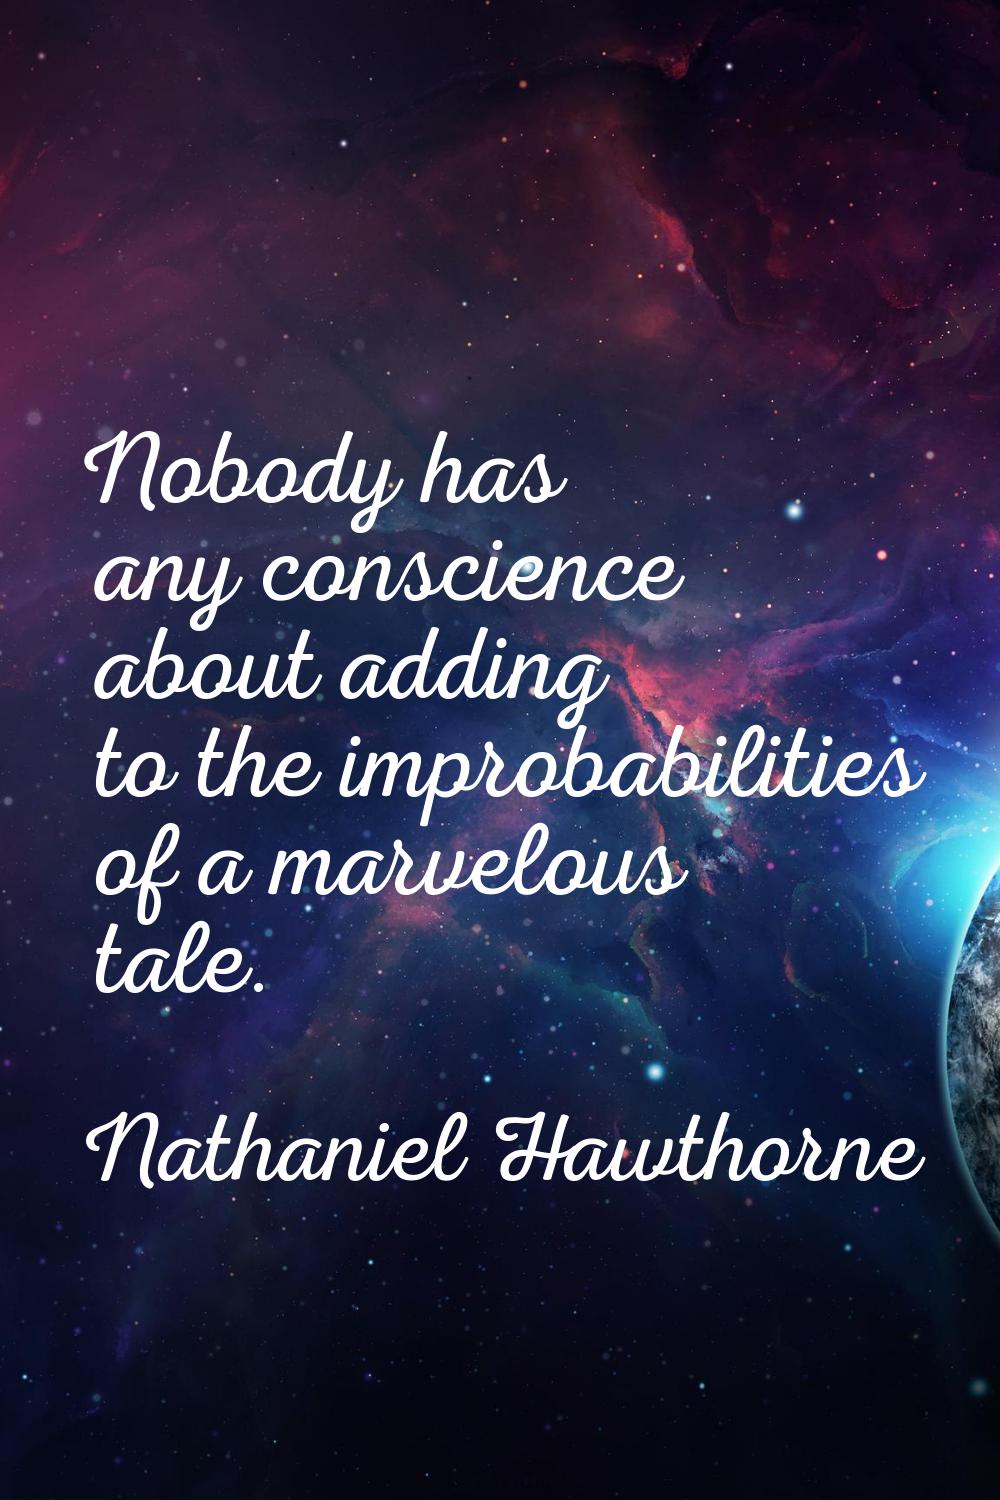 Nobody has any conscience about adding to the improbabilities of a marvelous tale.